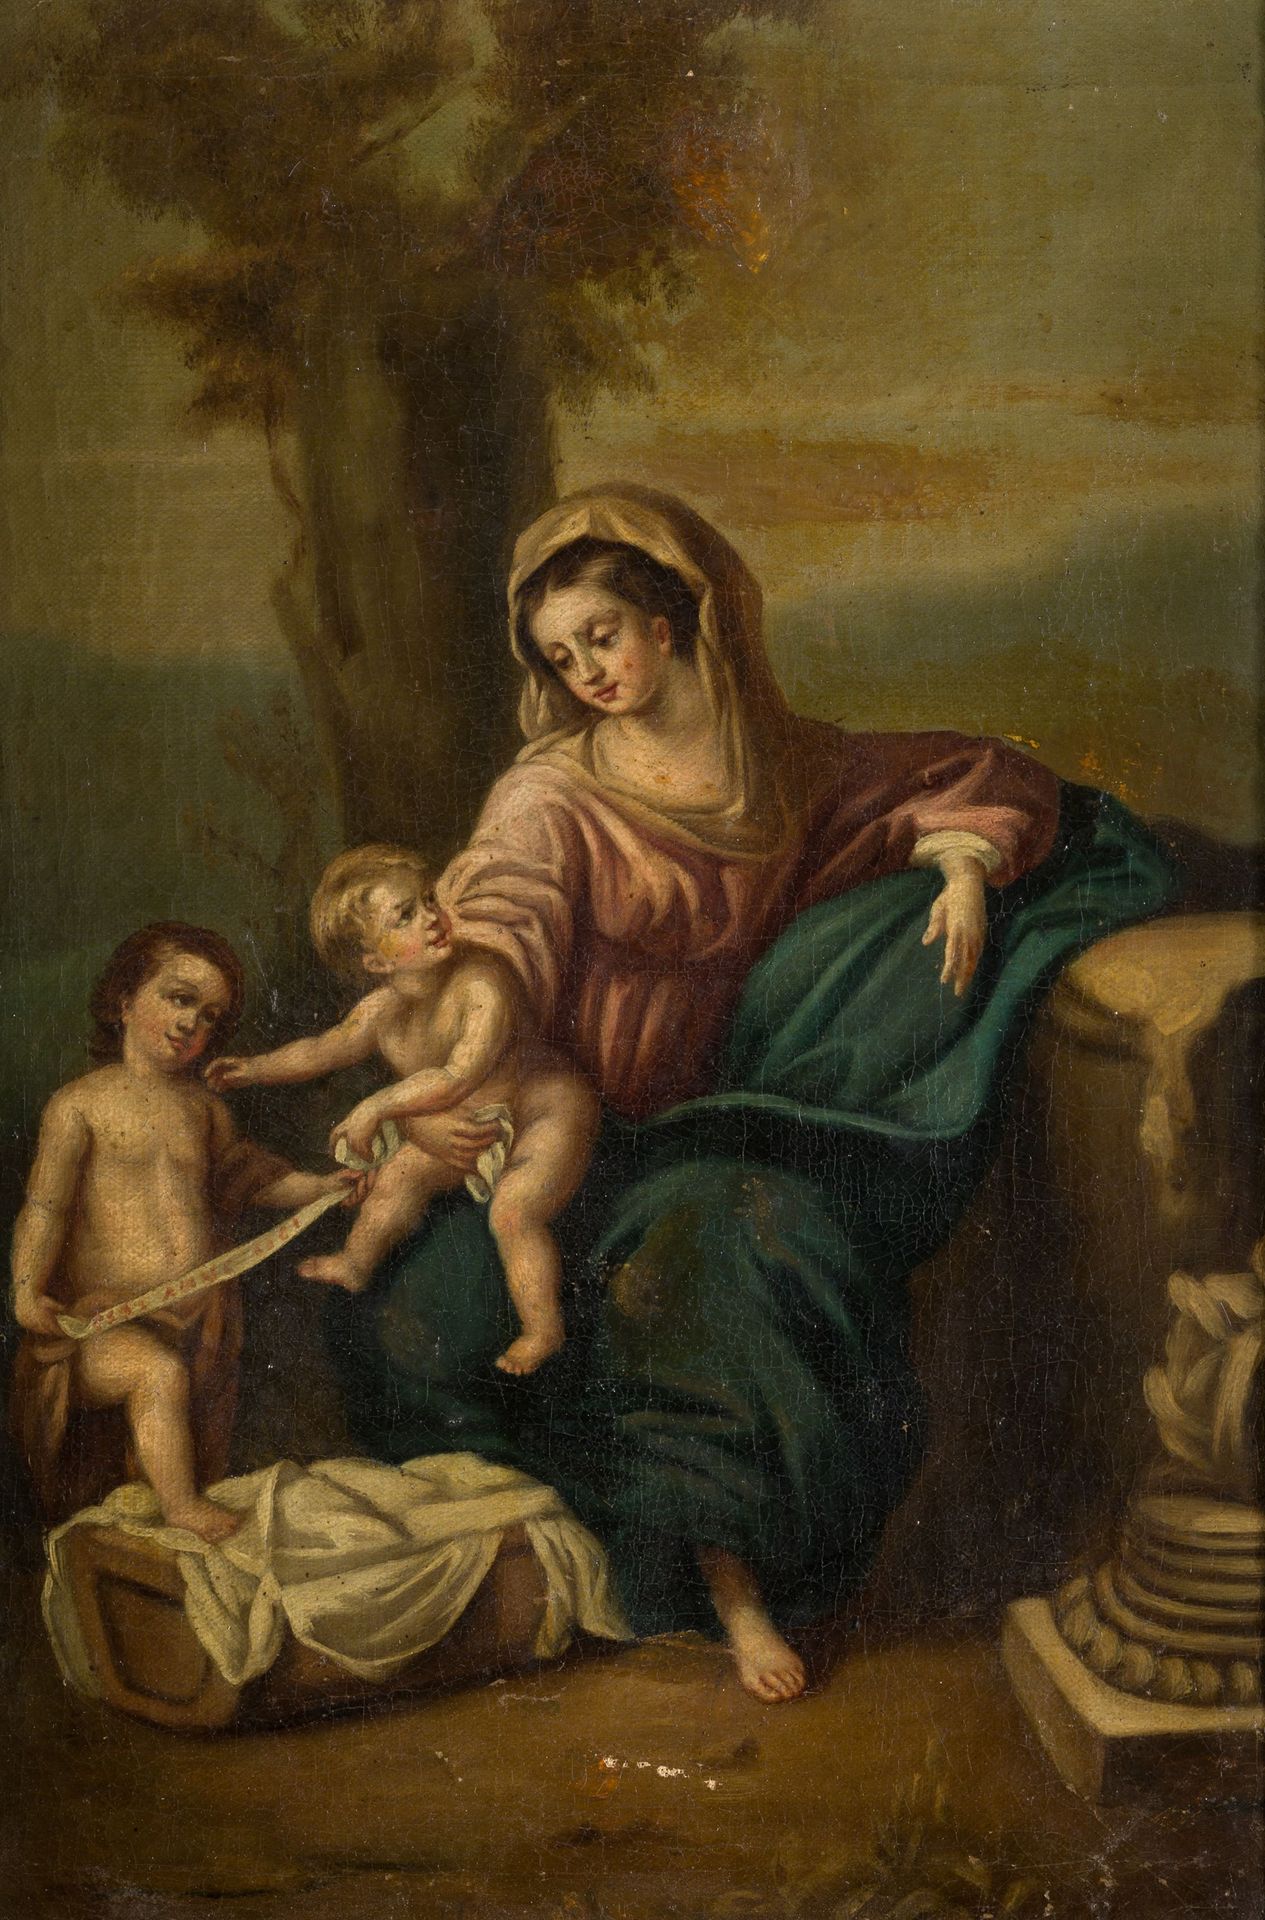 ANONYMOUS (C. 18th / C. 19th) “Holy Family" Oil on canvas. 40 x 28,5 cm